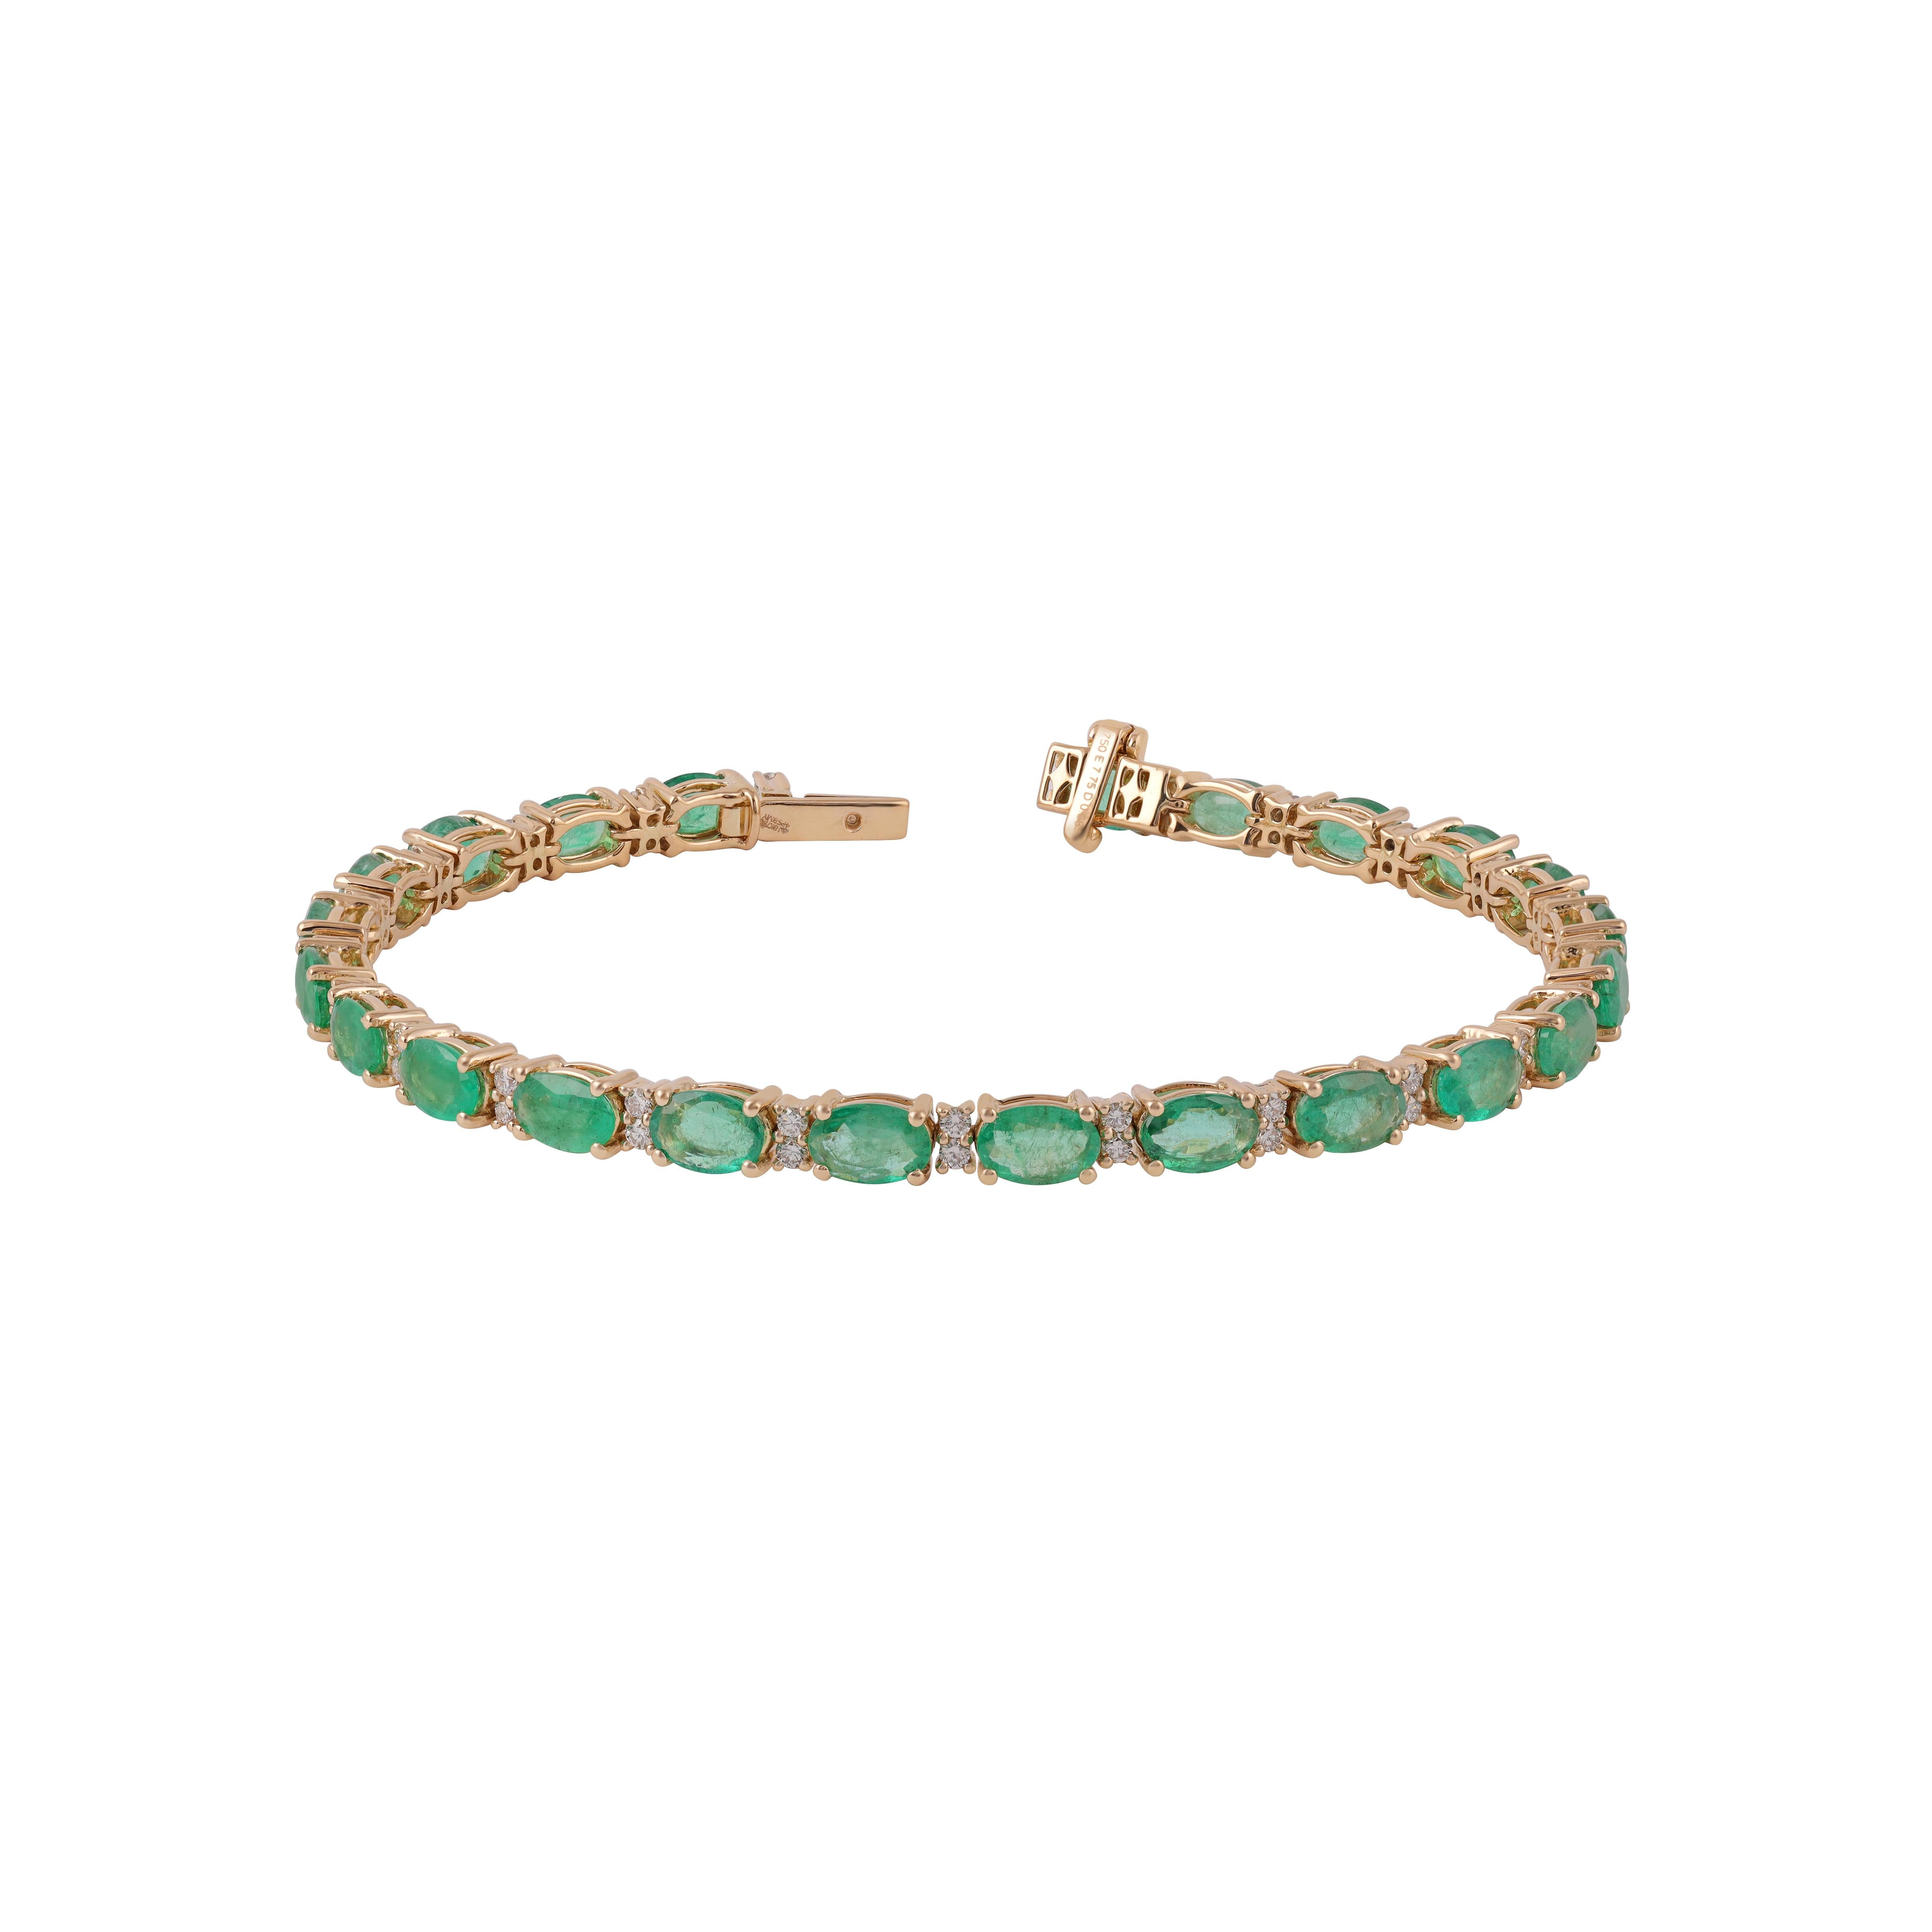 7.75 Carat Zambian Emerald Oval Cuts & Diamonds Bracelet 18k Yellow Gold In New Condition For Sale In Jaipur, Rajasthan